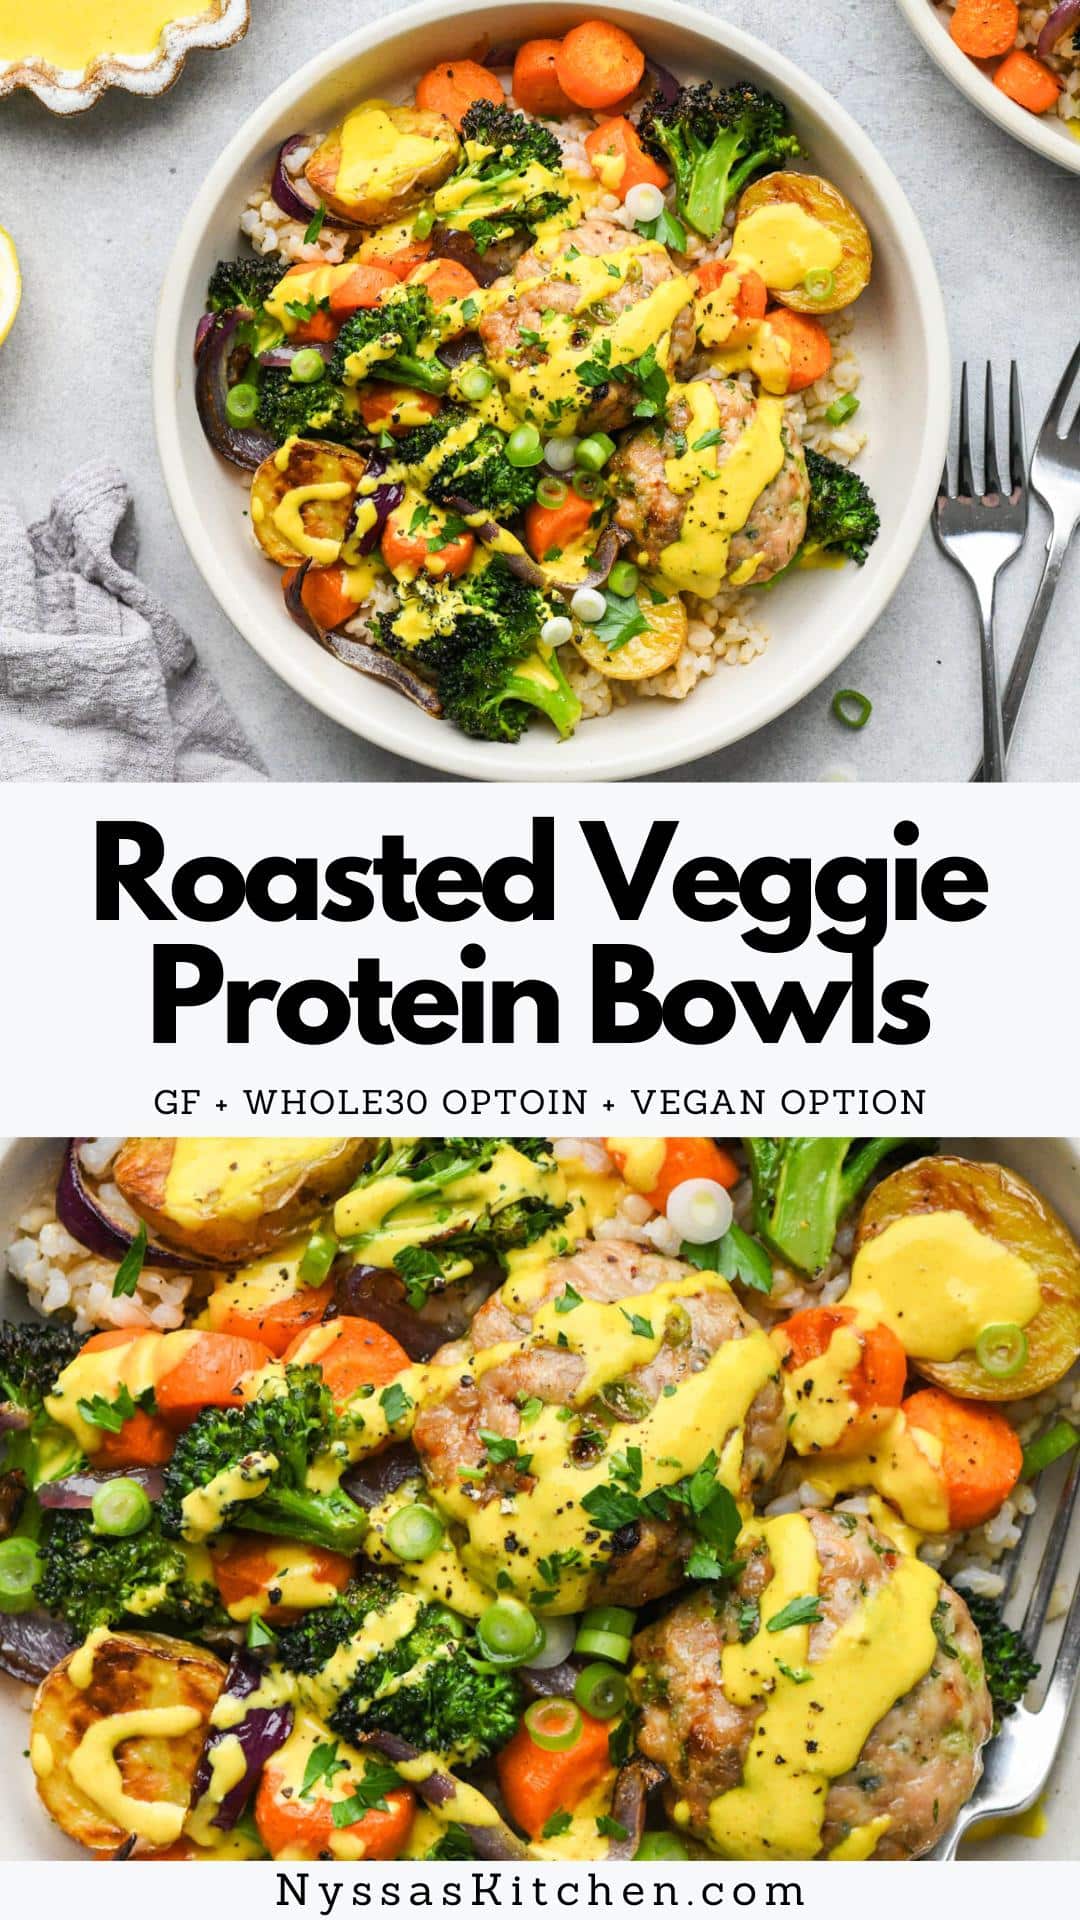 These roasted veggie protein bowls with turmeric tahini and flavorful chicken patties are a delicious healthy lunch or dinner option! Perfect for meal prep or a quick and easy family meal that everyone will love. They are prepped on a single sheet pan and made with a colorful array of vegetables for tons of nutrients! Gluten free, with Paleo, Whole30, and vegan / vegetarian options.